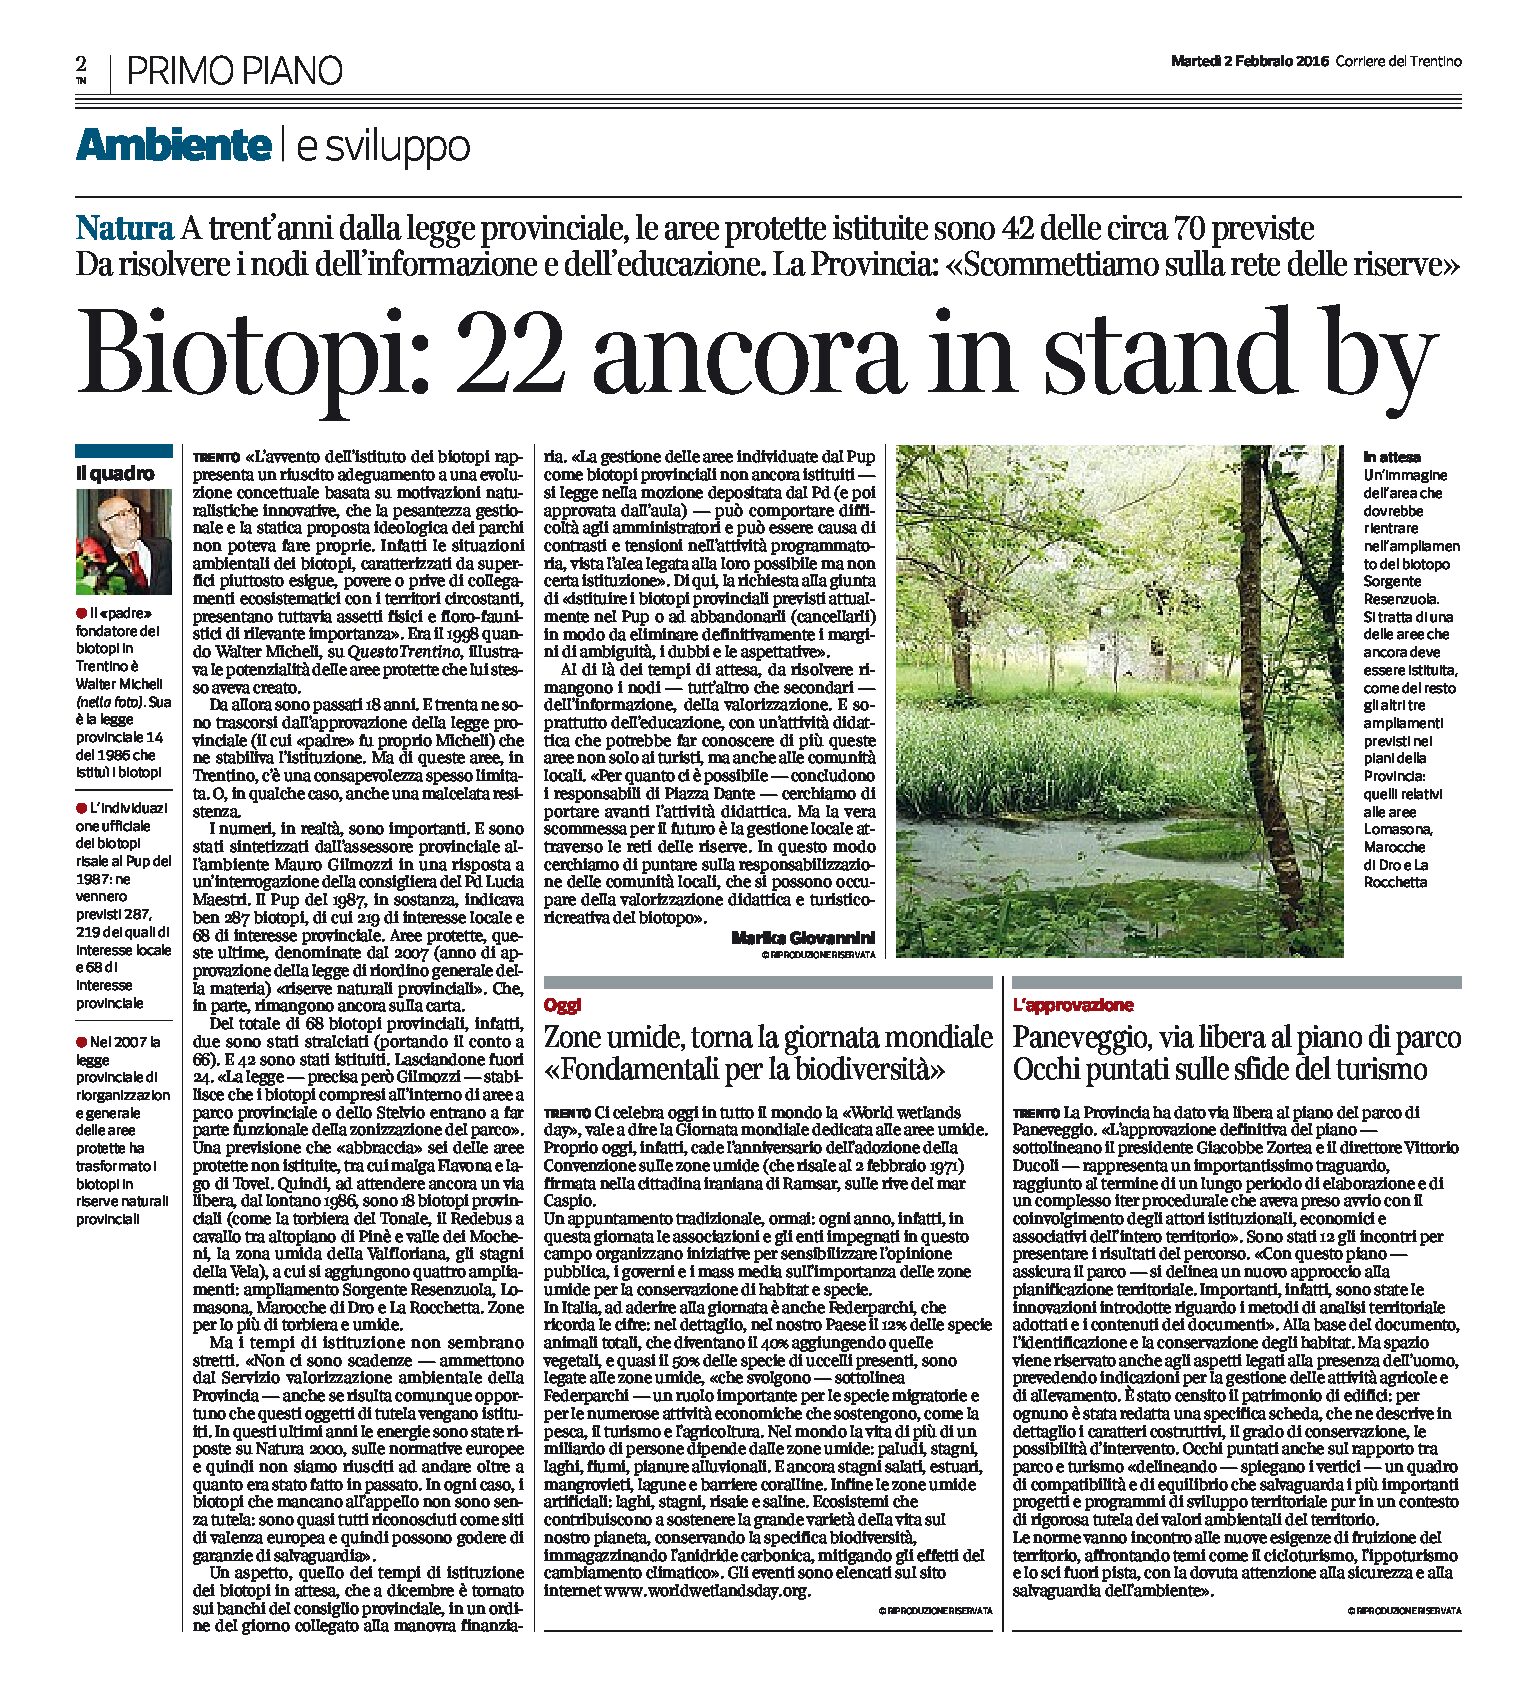 Biotopi: 22 ancora in stand-by.